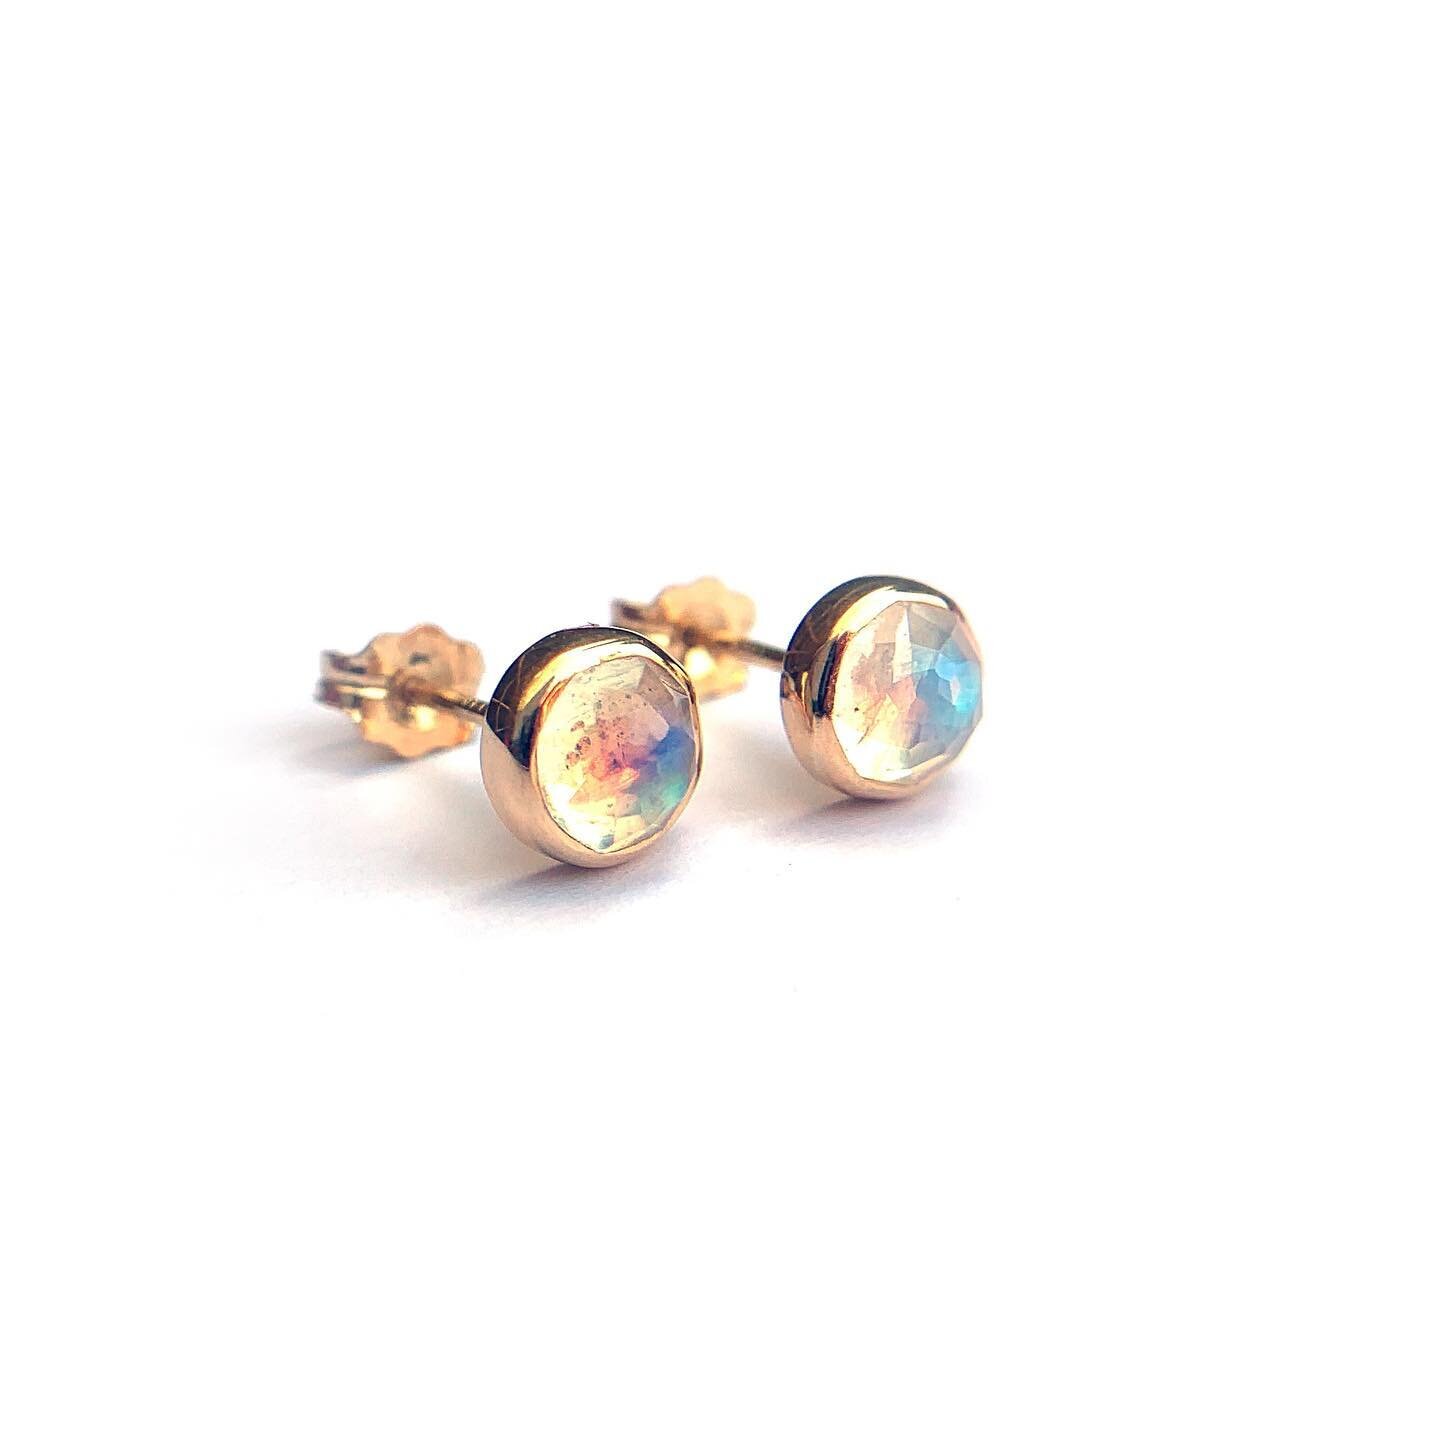 Choice earrings. Moonstones in 14k yellow gold. Available at Honed
@honedbyclairekinder